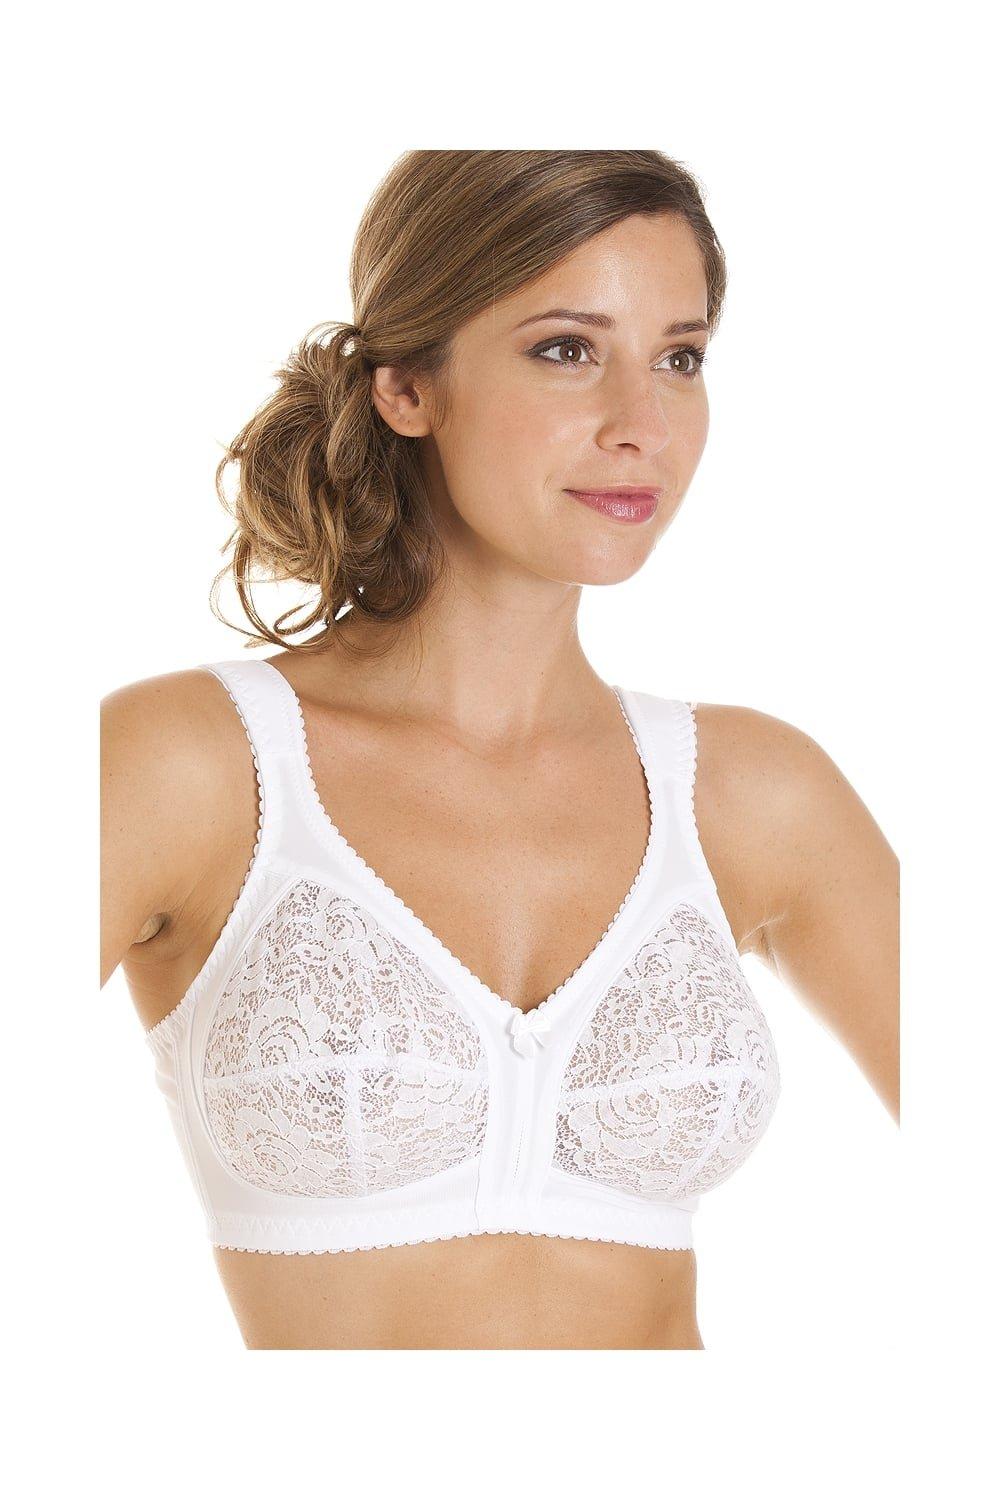 Deevaz Women's Non-padded Non-wired Bridal Lace Bralette & Brief set i –